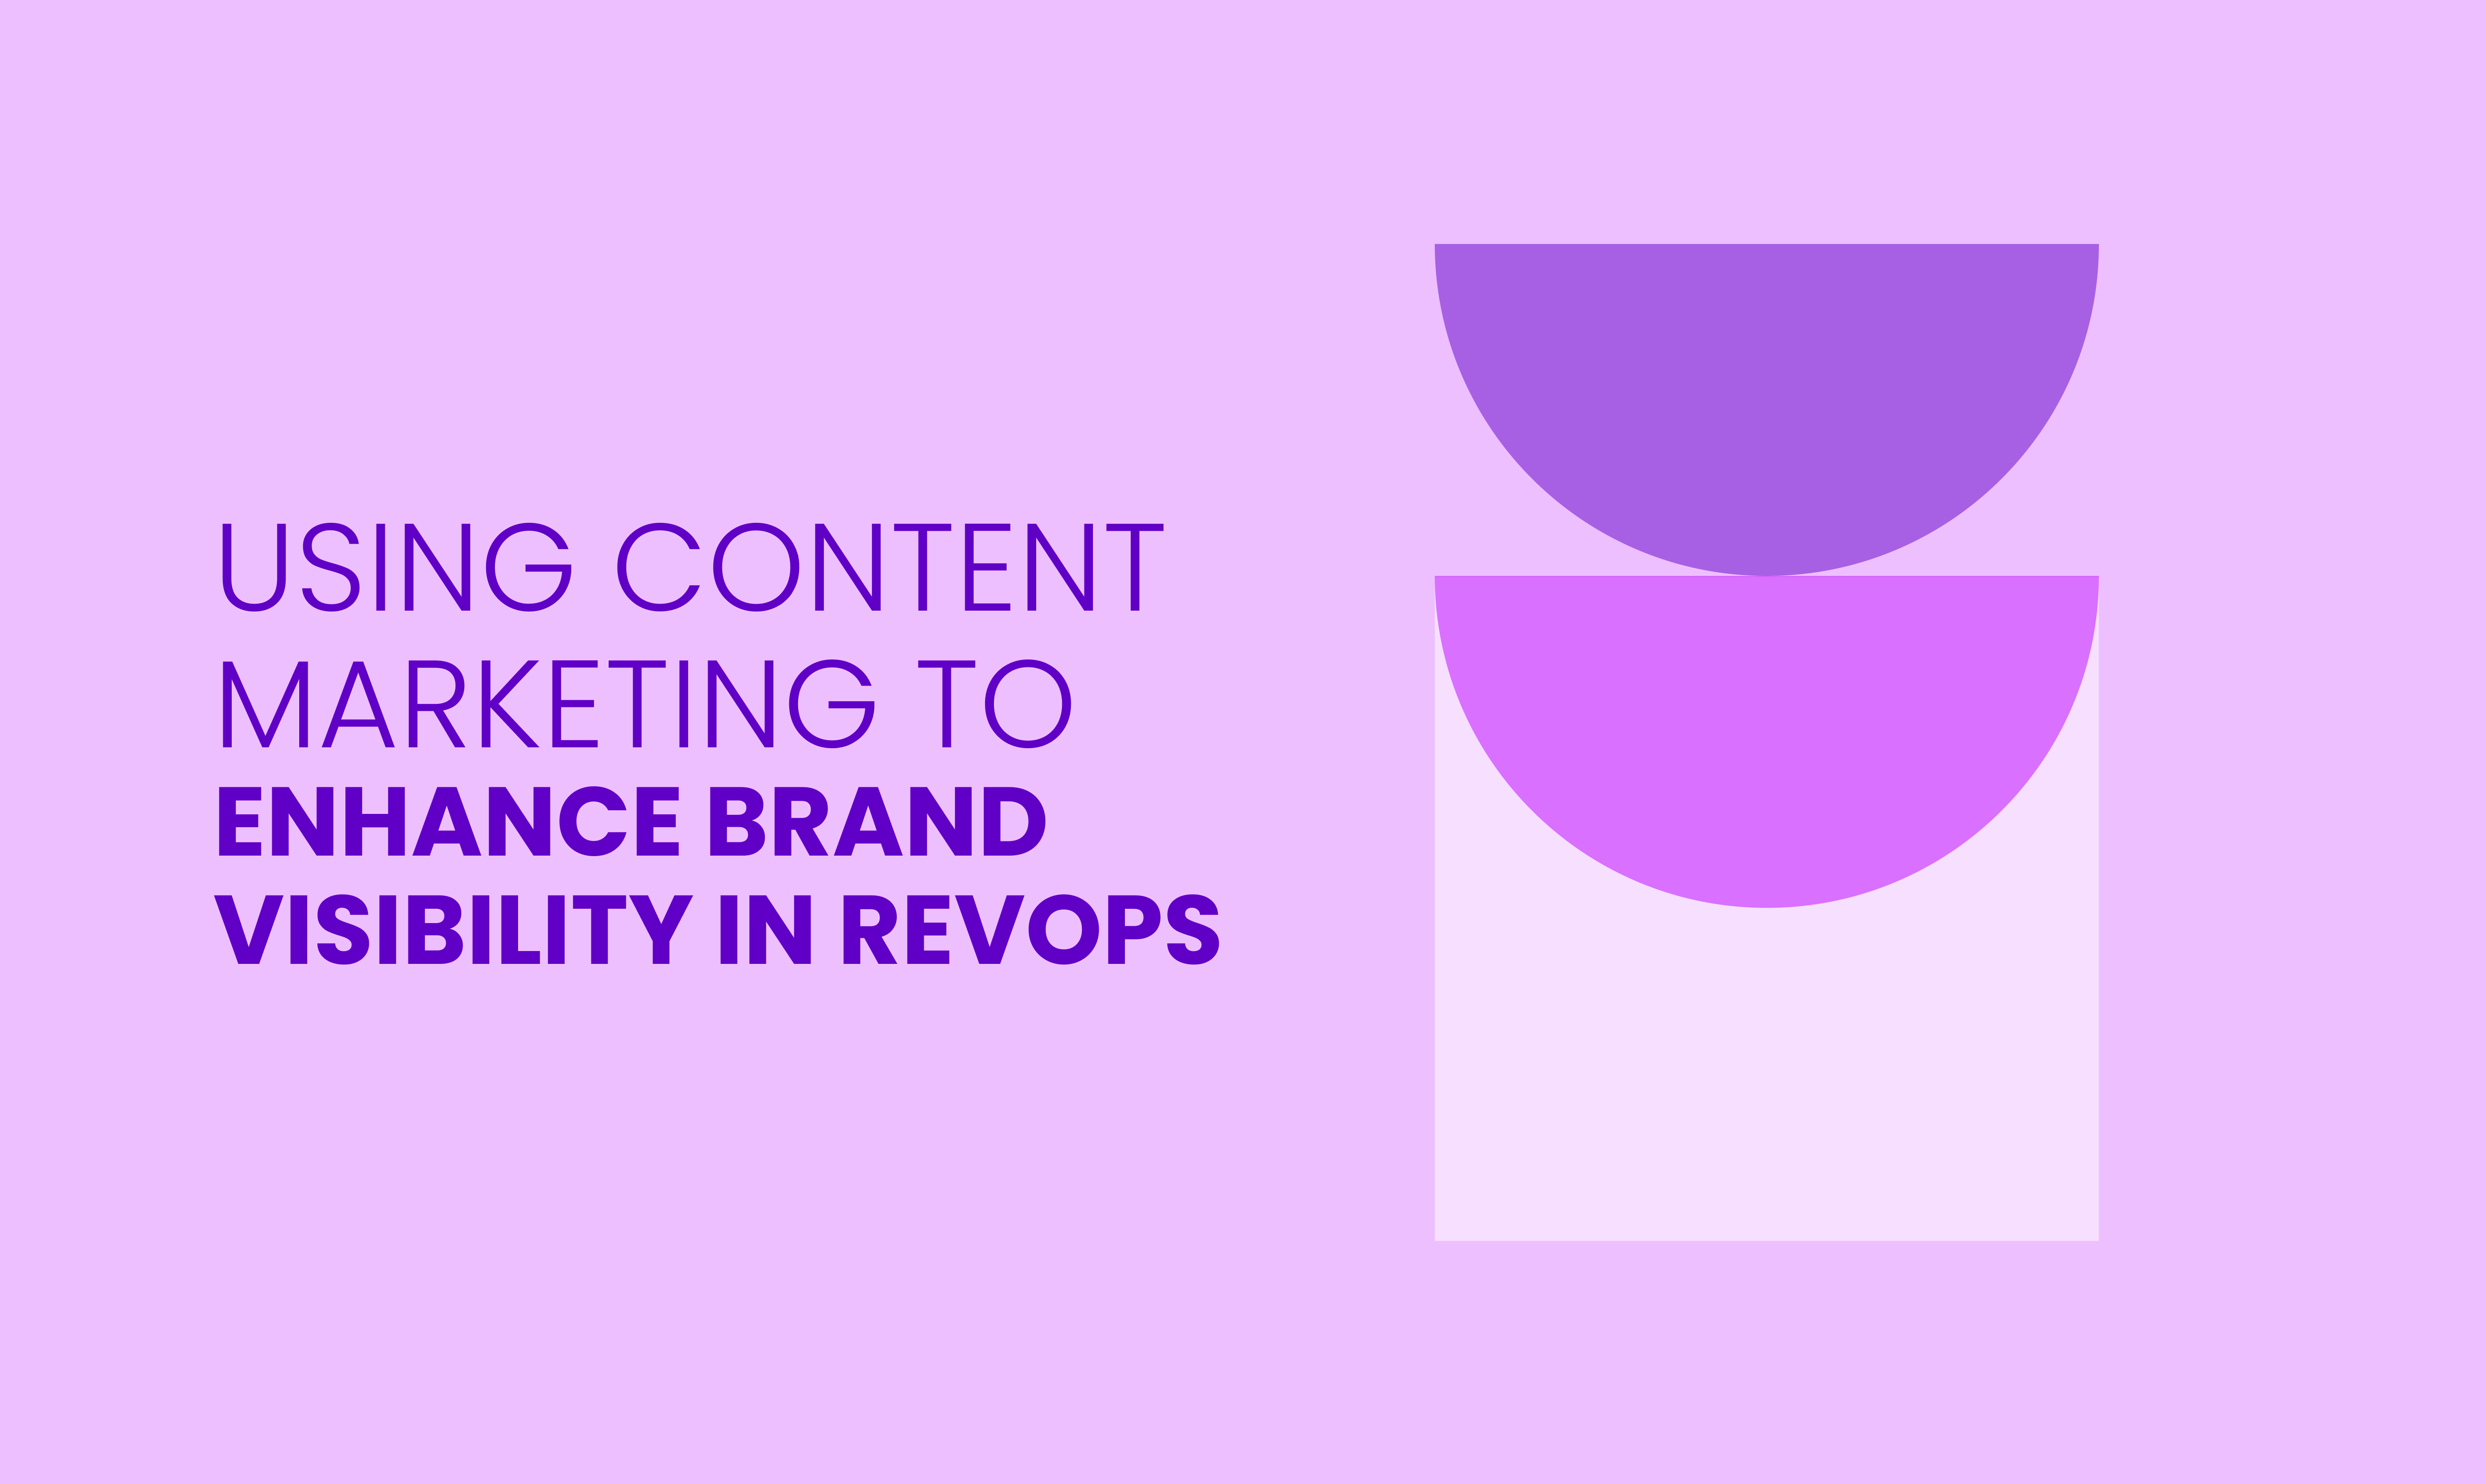 USING CONTENT MARKETING TO  ENHANCE BRAND VISIBILITY IN REVOPS